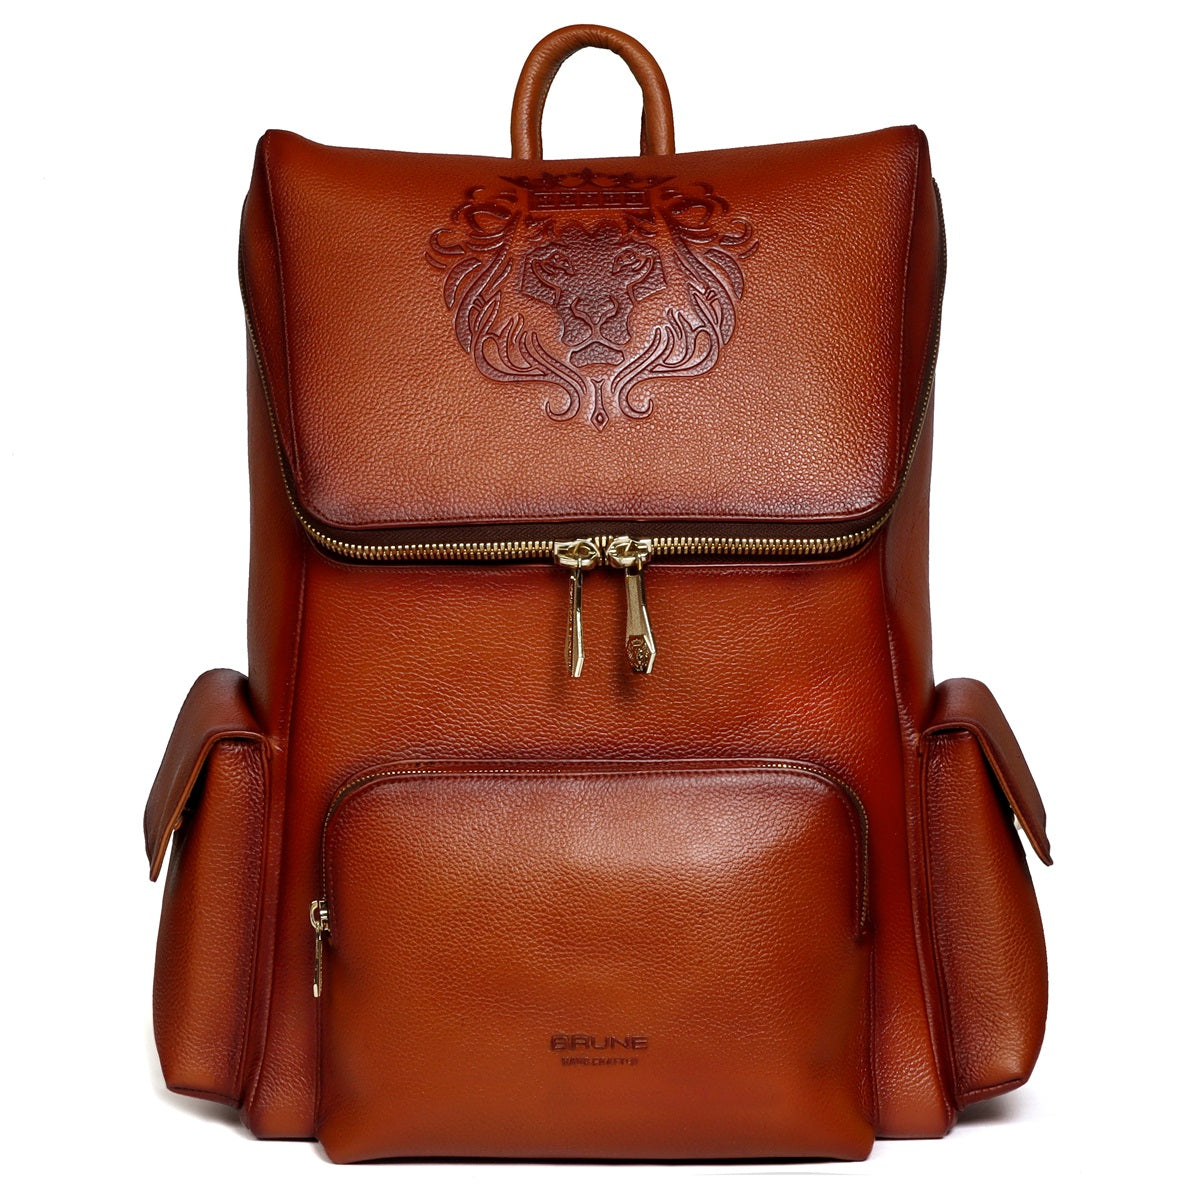 Textured Top Opening Zip Compartment Tan Leather Backpack